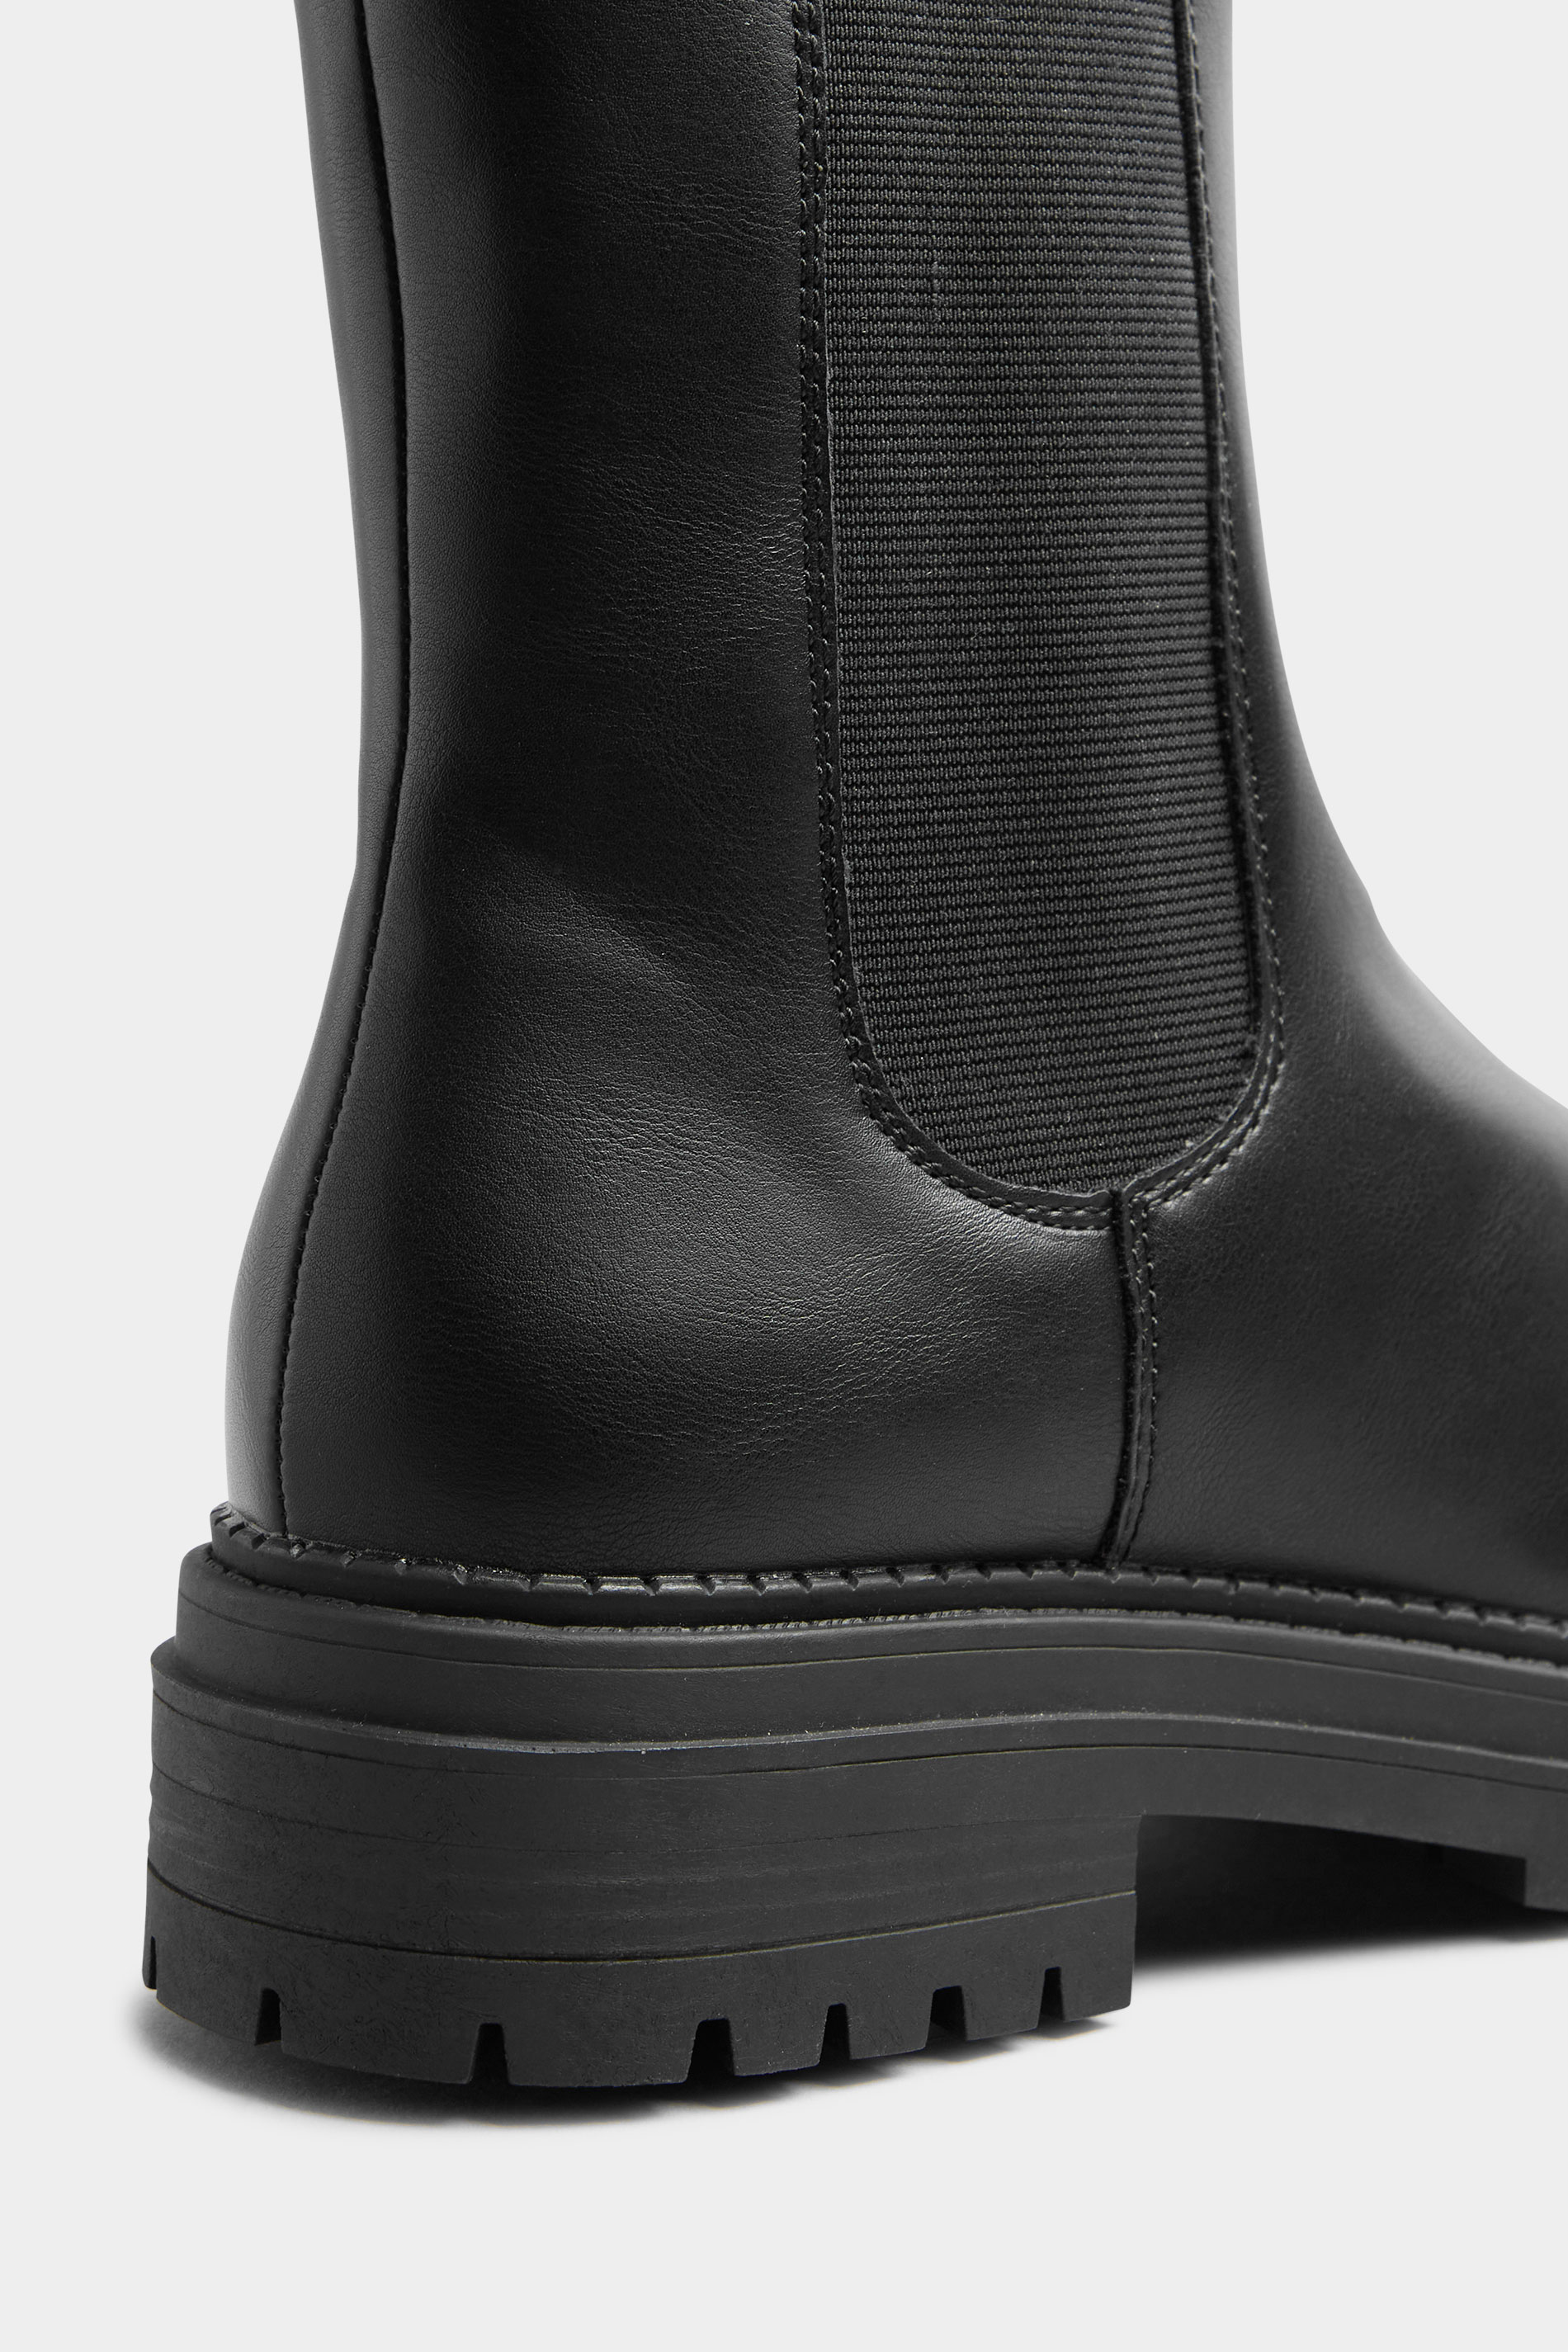 LIMITED COLLECTION Black Leather Look Chunky High Chelsea Boots In ...